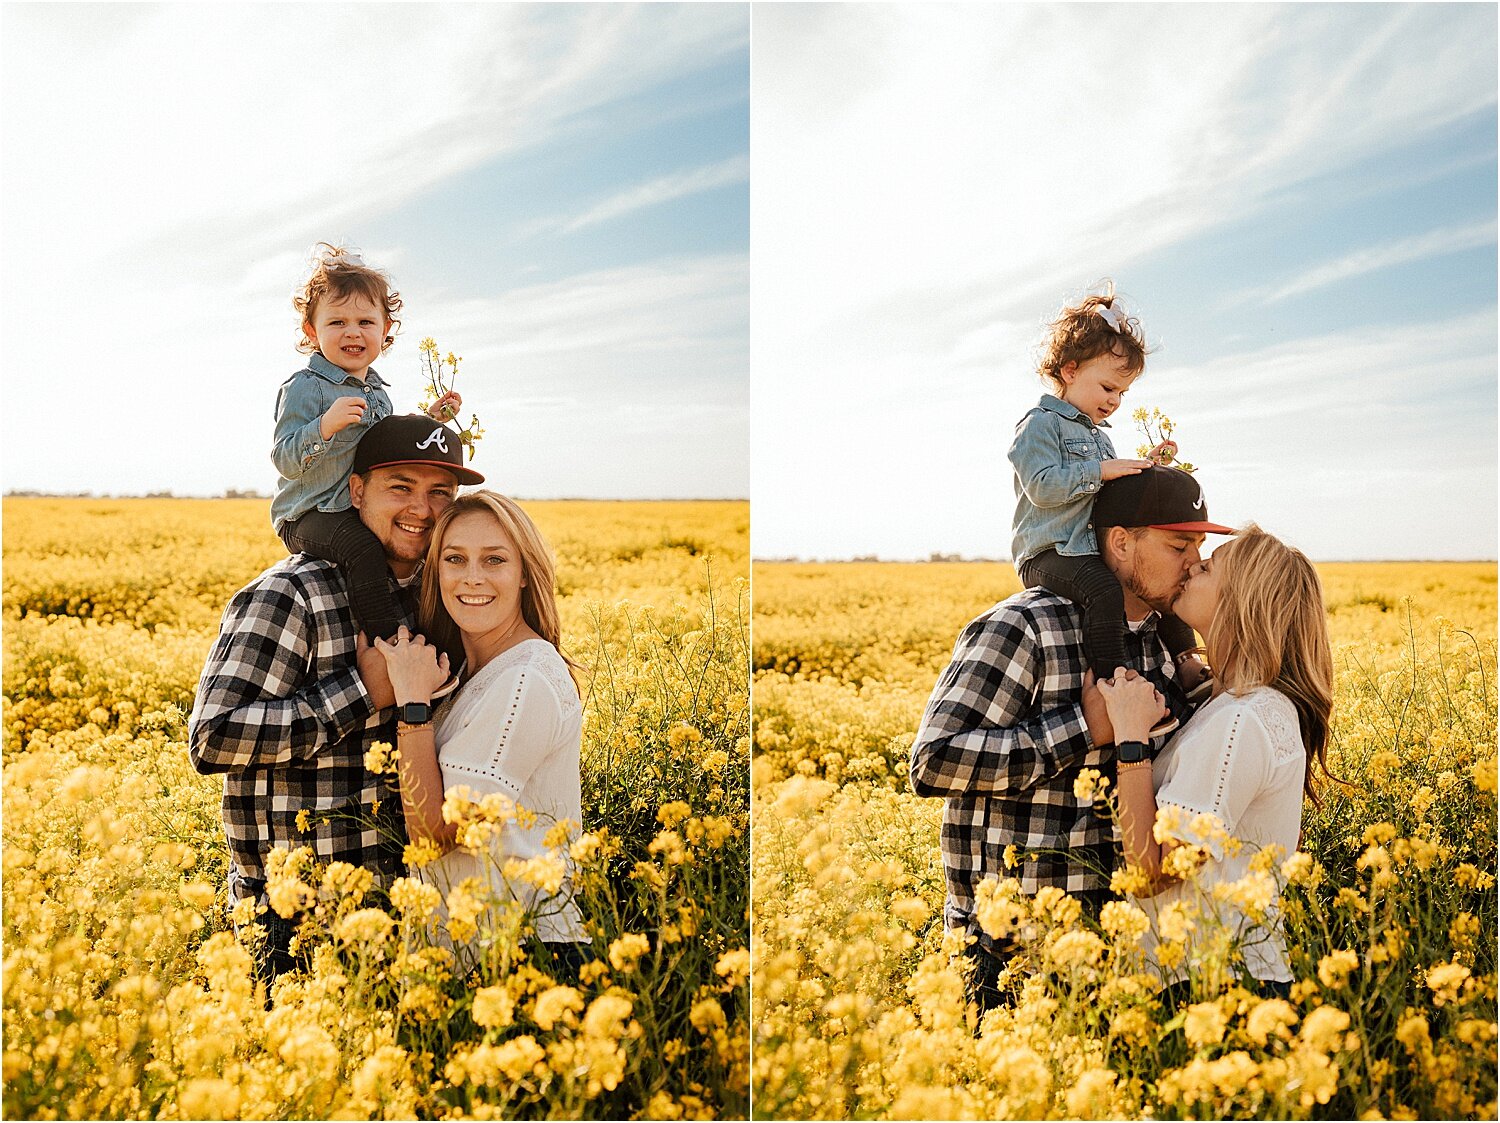 spring field of yellow flowers family session8.jpg